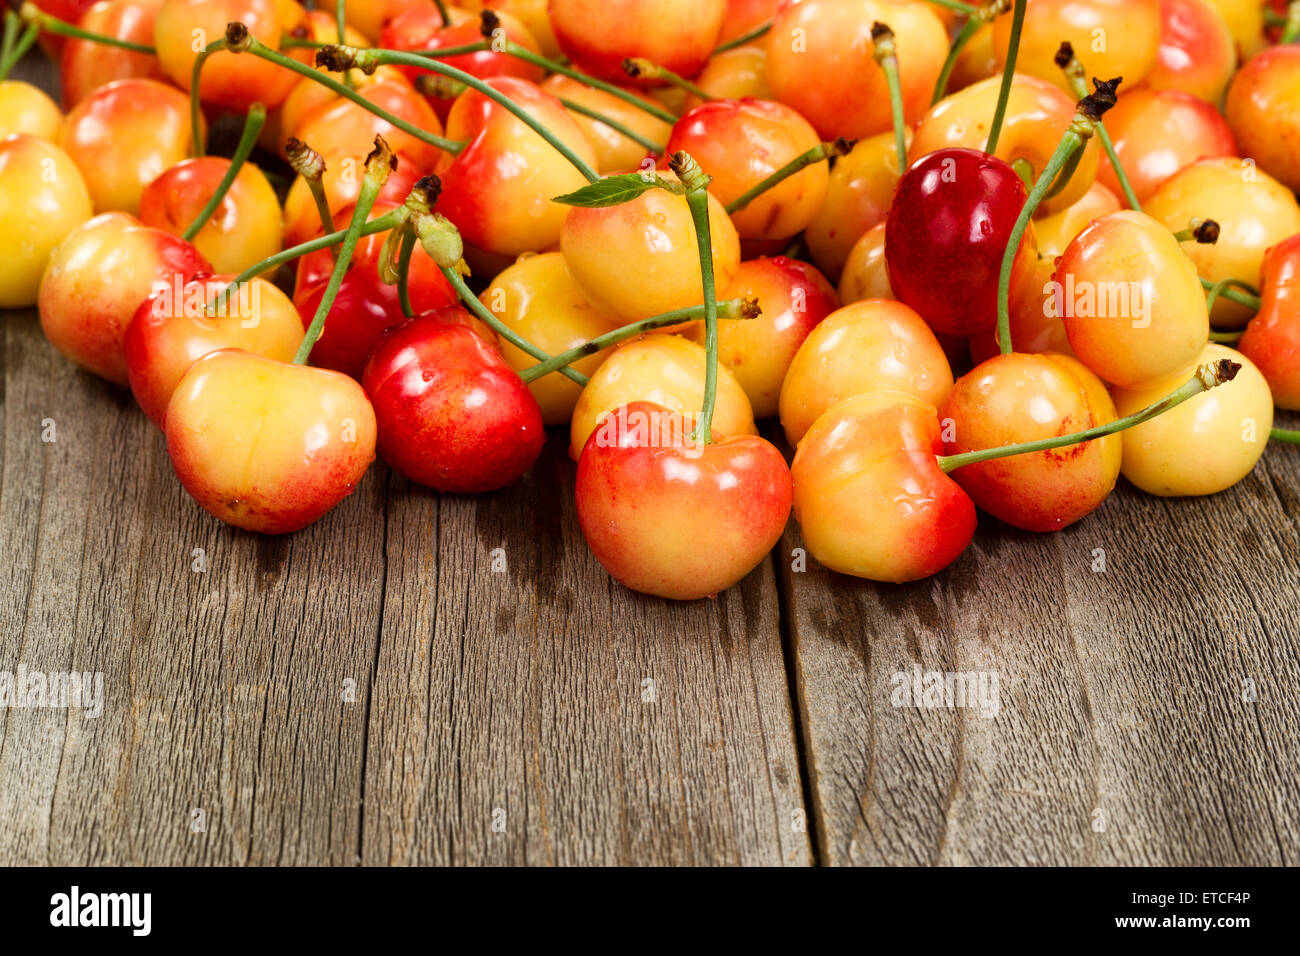 Close up of freshly picked rainier cherries, water droplets on them, on rustic wood. Stock Photo